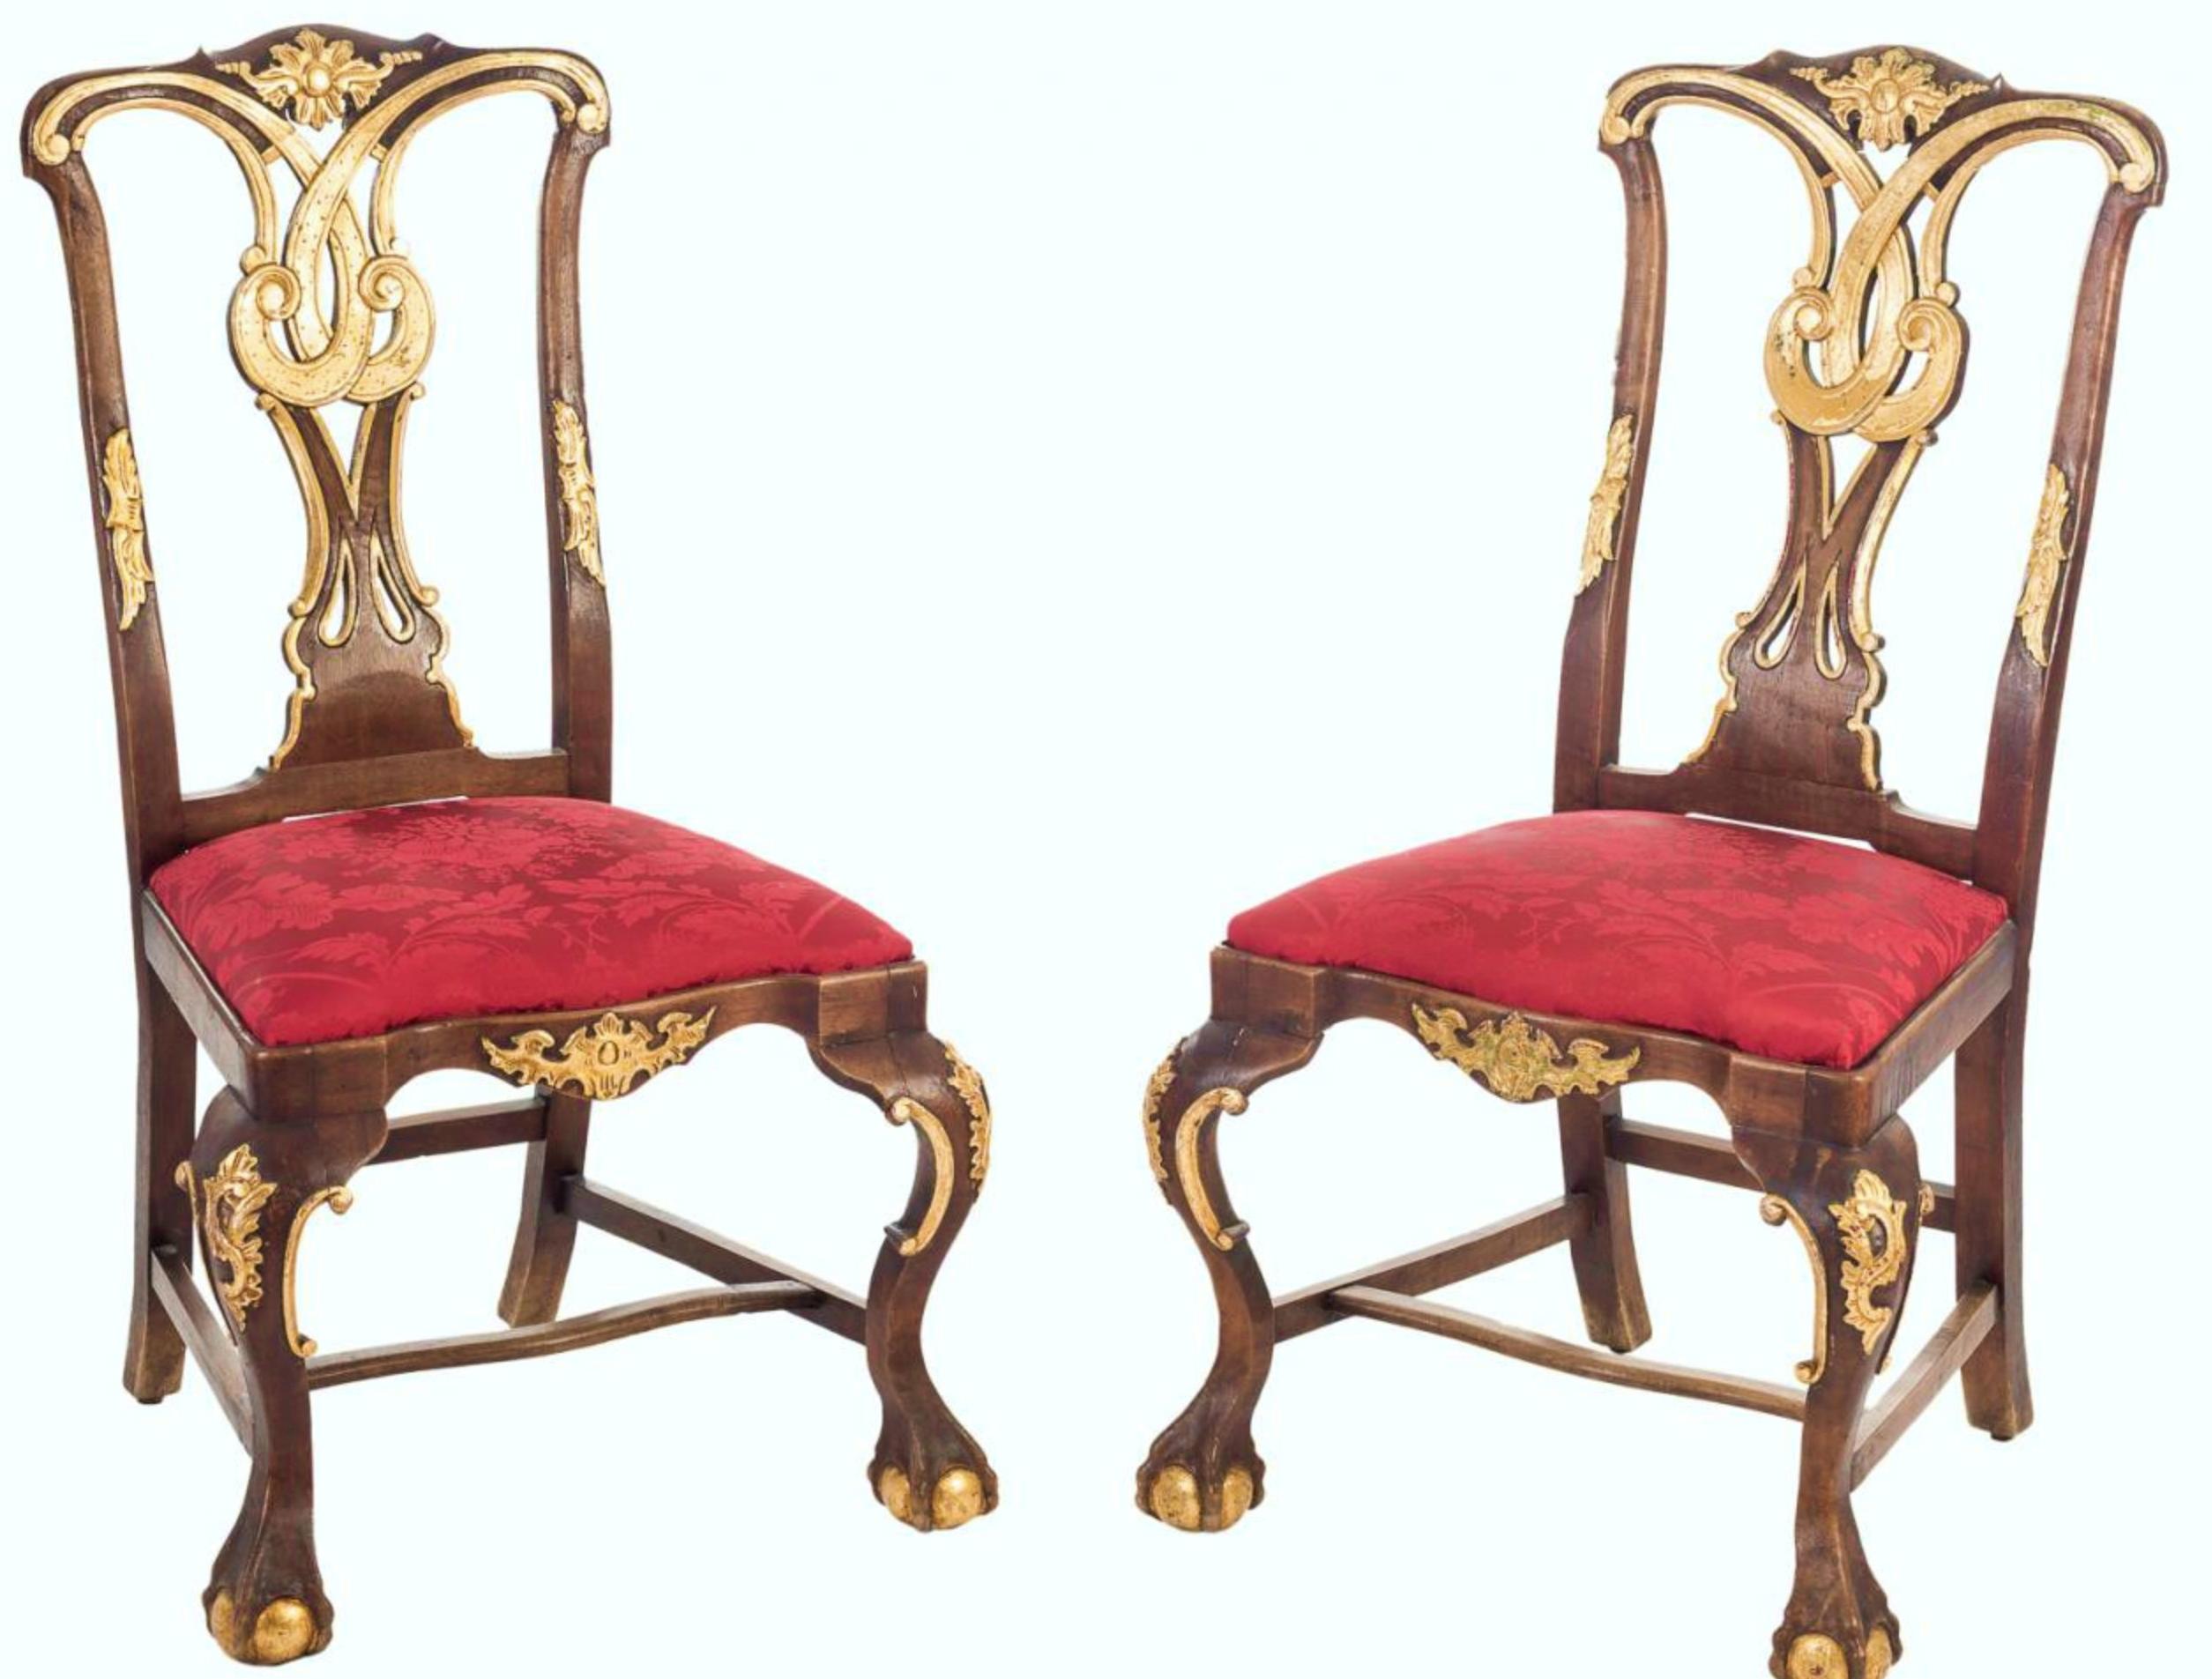 British Chippendale Set, Sofa /2 Armchairs / 8 Chairs, 18th Century